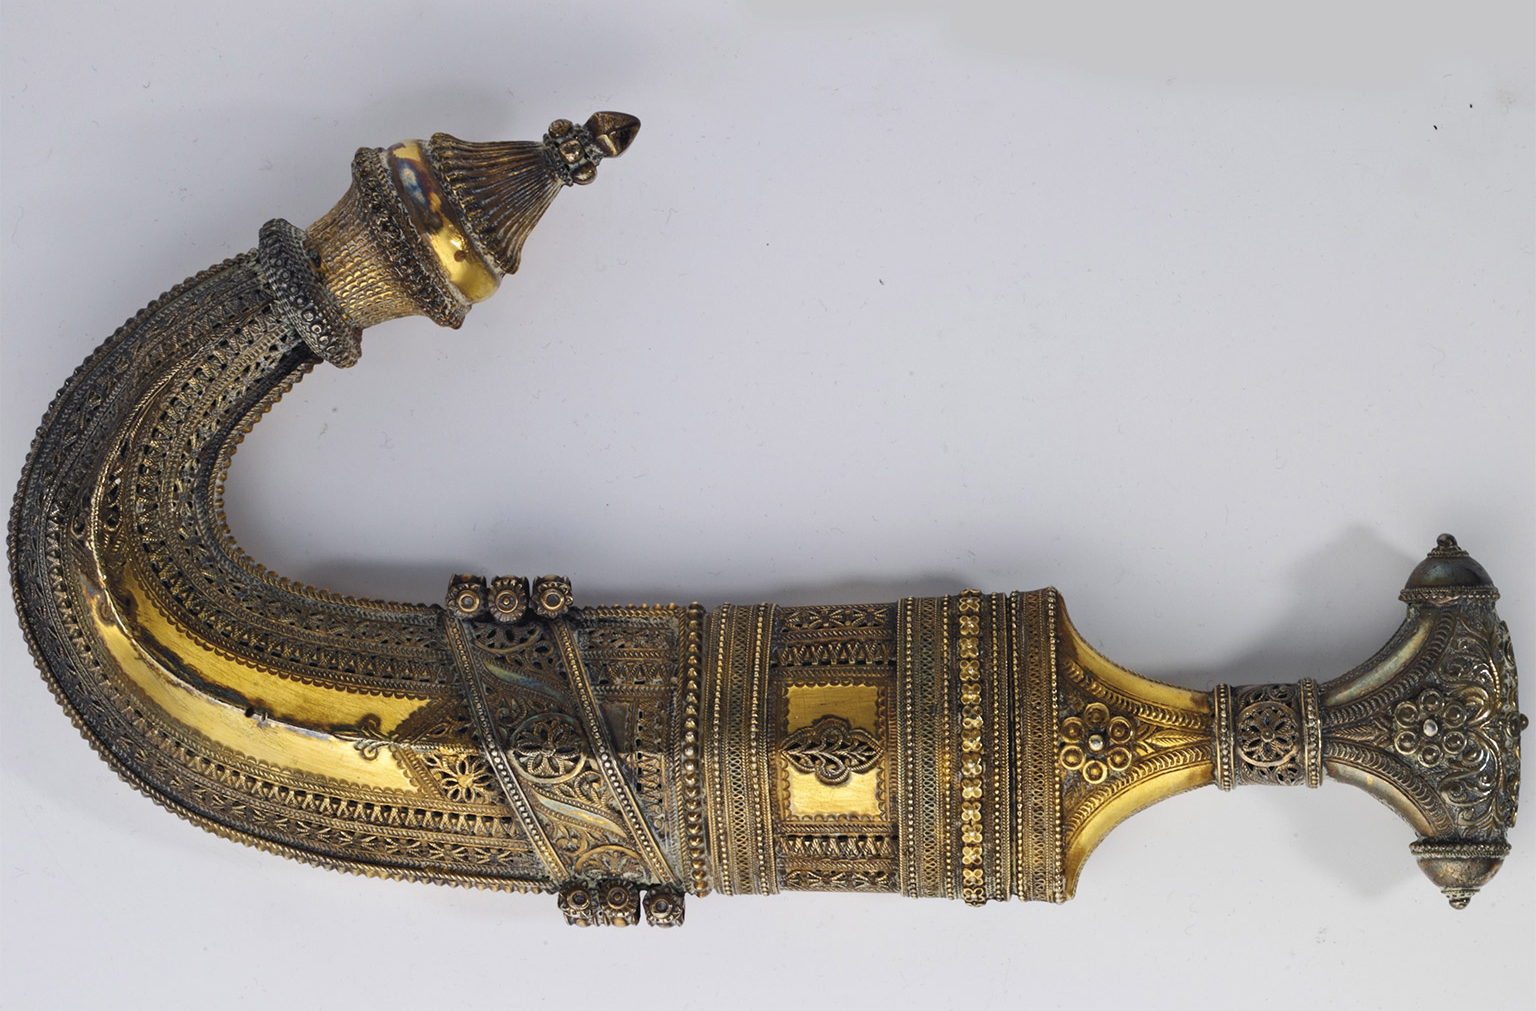 Lawrence of Arabia's dagger. Courtesy the Department of Culture, Media, and Sports.